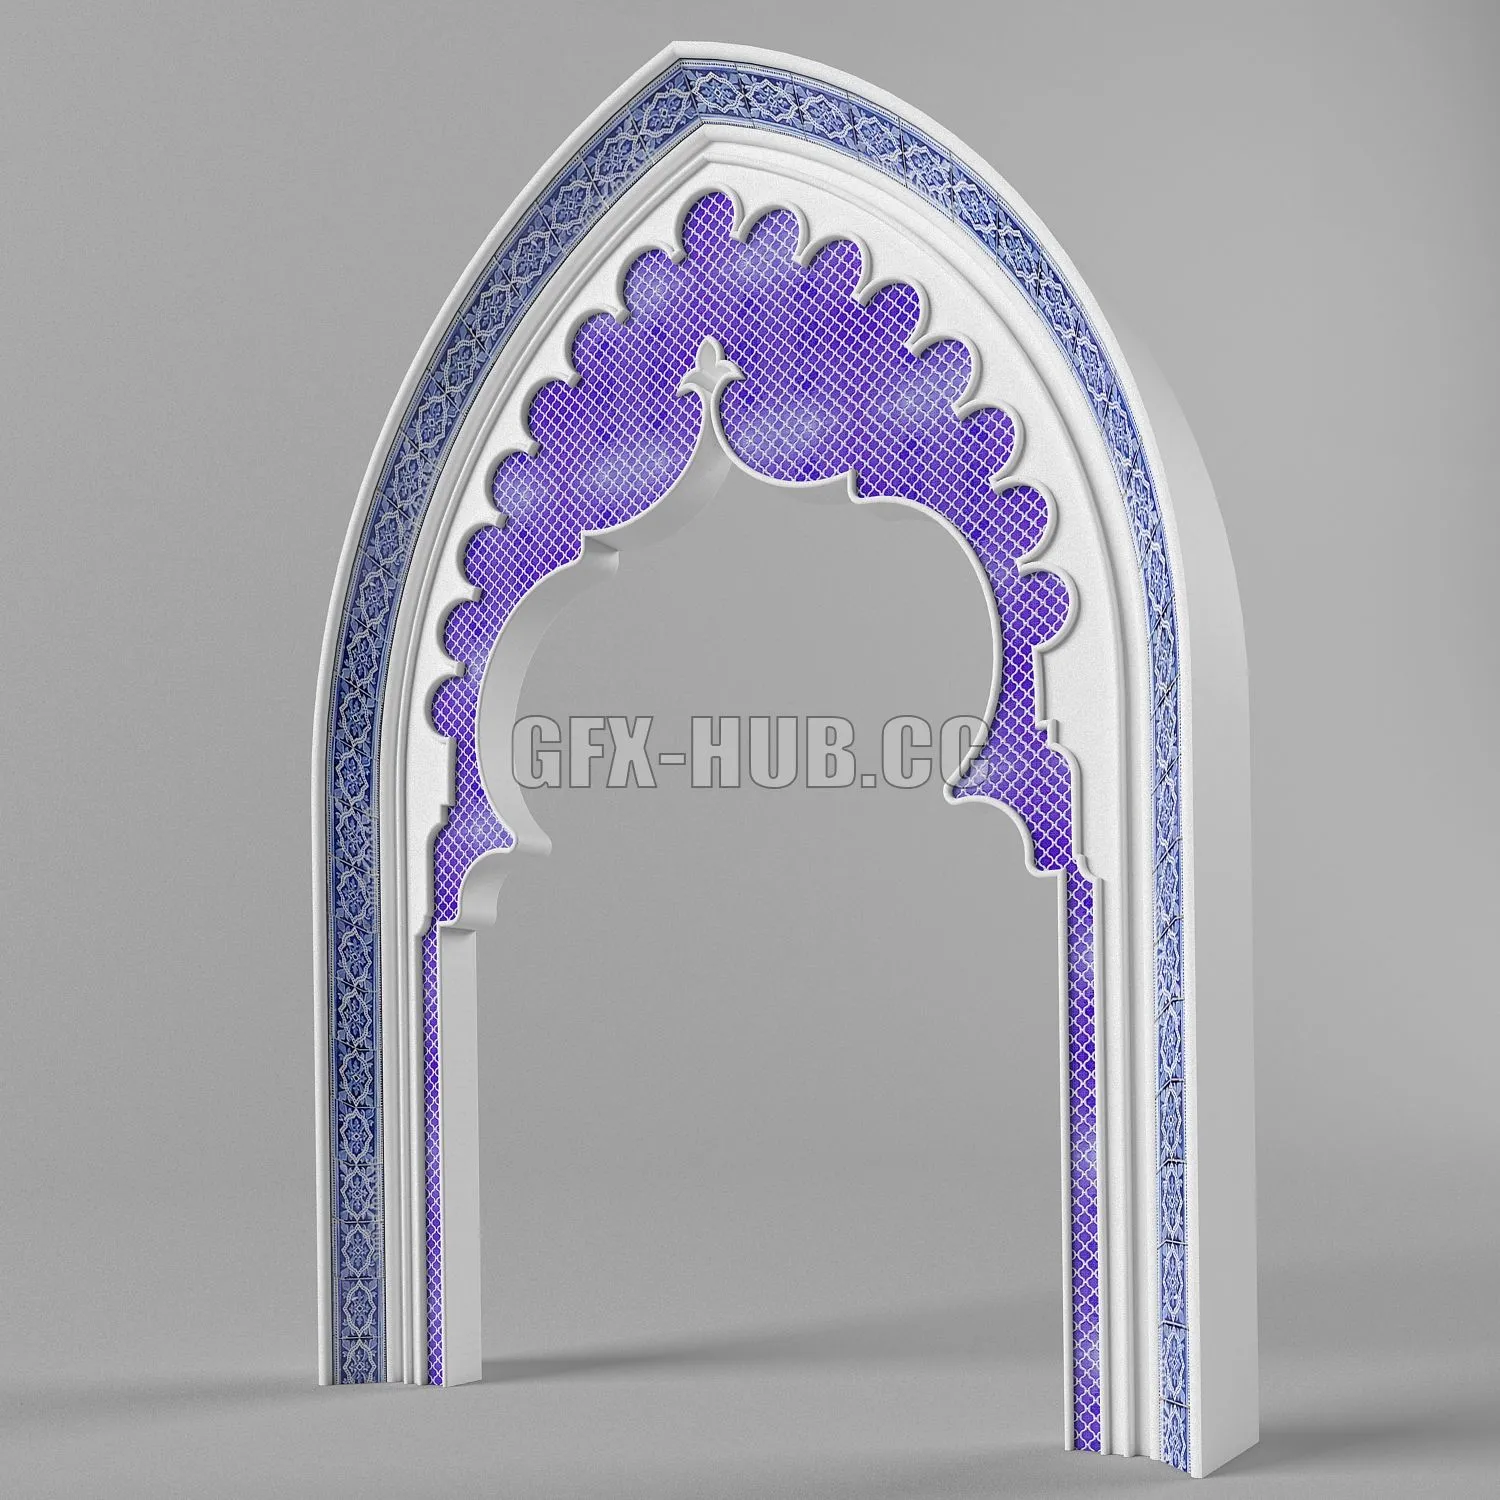 FURNITURE 3D MODELS – MOROCCAN ARCH